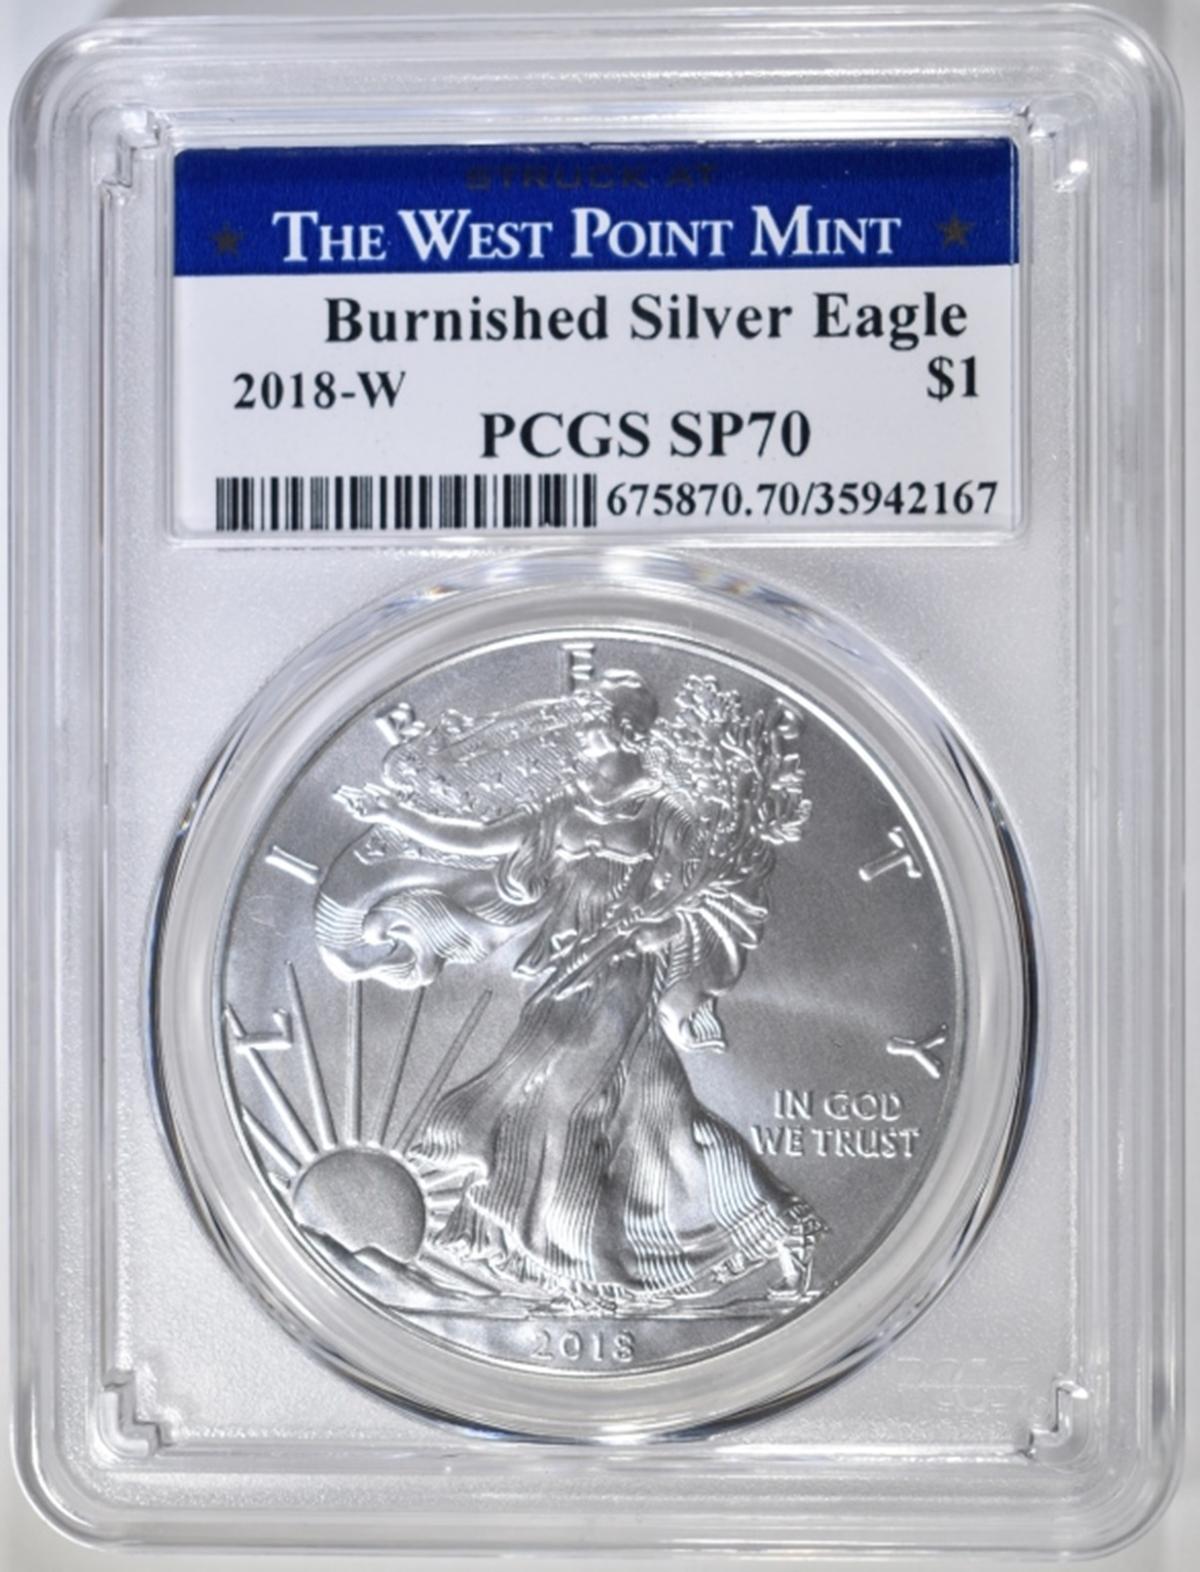 2018-W BURNISHED SILVER EAGLE  PCGS SP-70